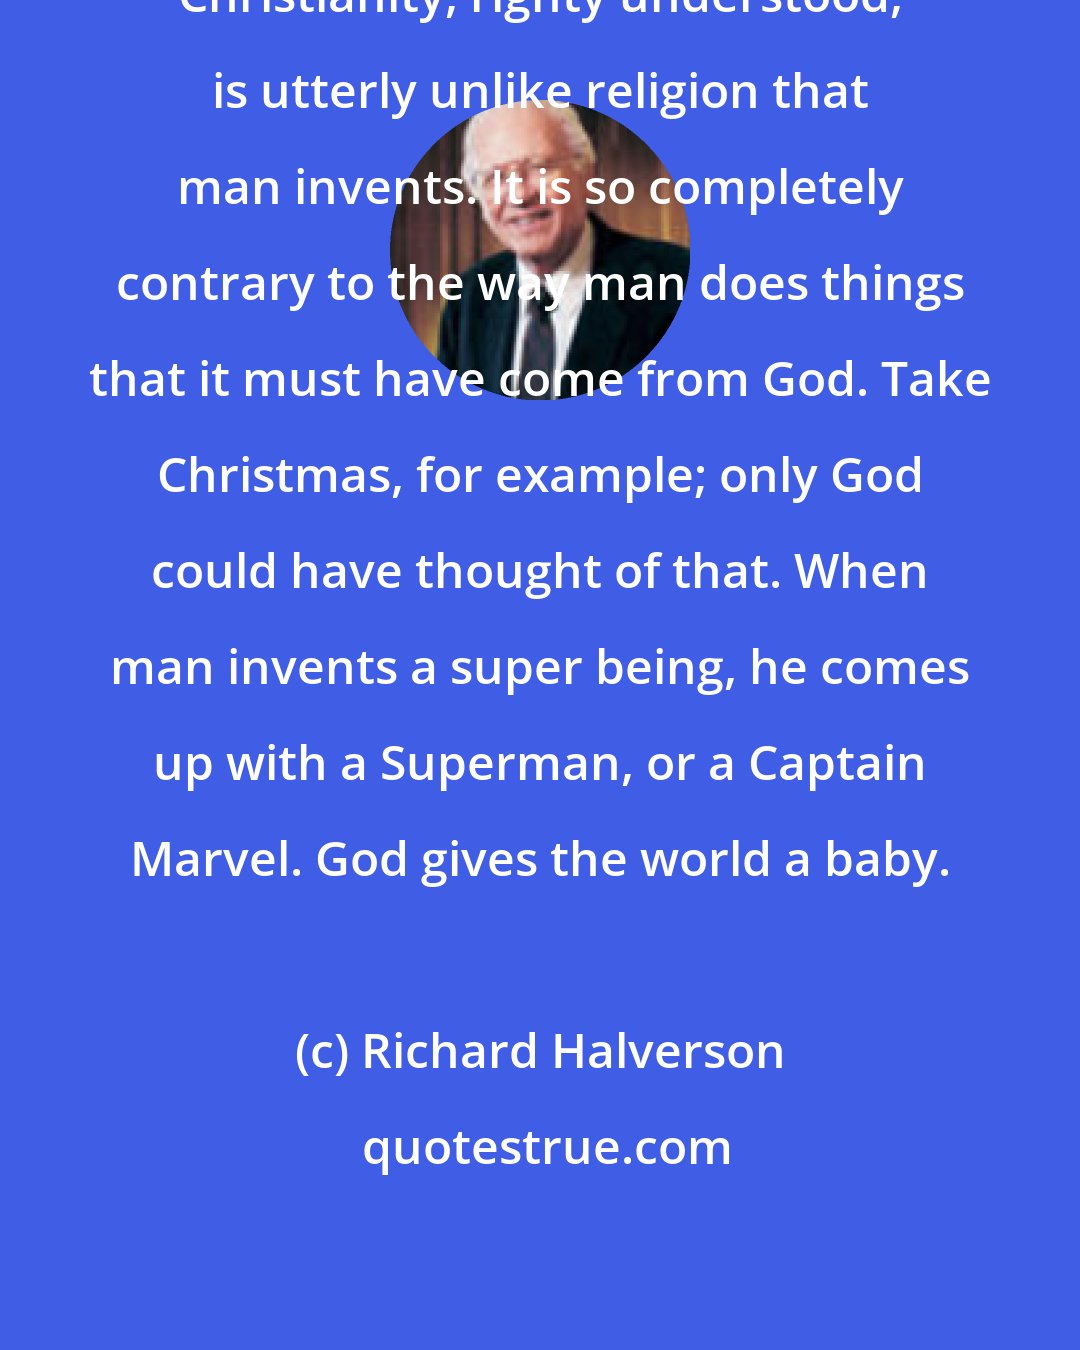 Richard Halverson: Christianity, righty understood, is utterly unlike religion that man invents. It is so completely contrary to the way man does things that it must have come from God. Take Christmas, for example; only God could have thought of that. When man invents a super being, he comes up with a Superman, or a Captain Marvel. God gives the world a baby.